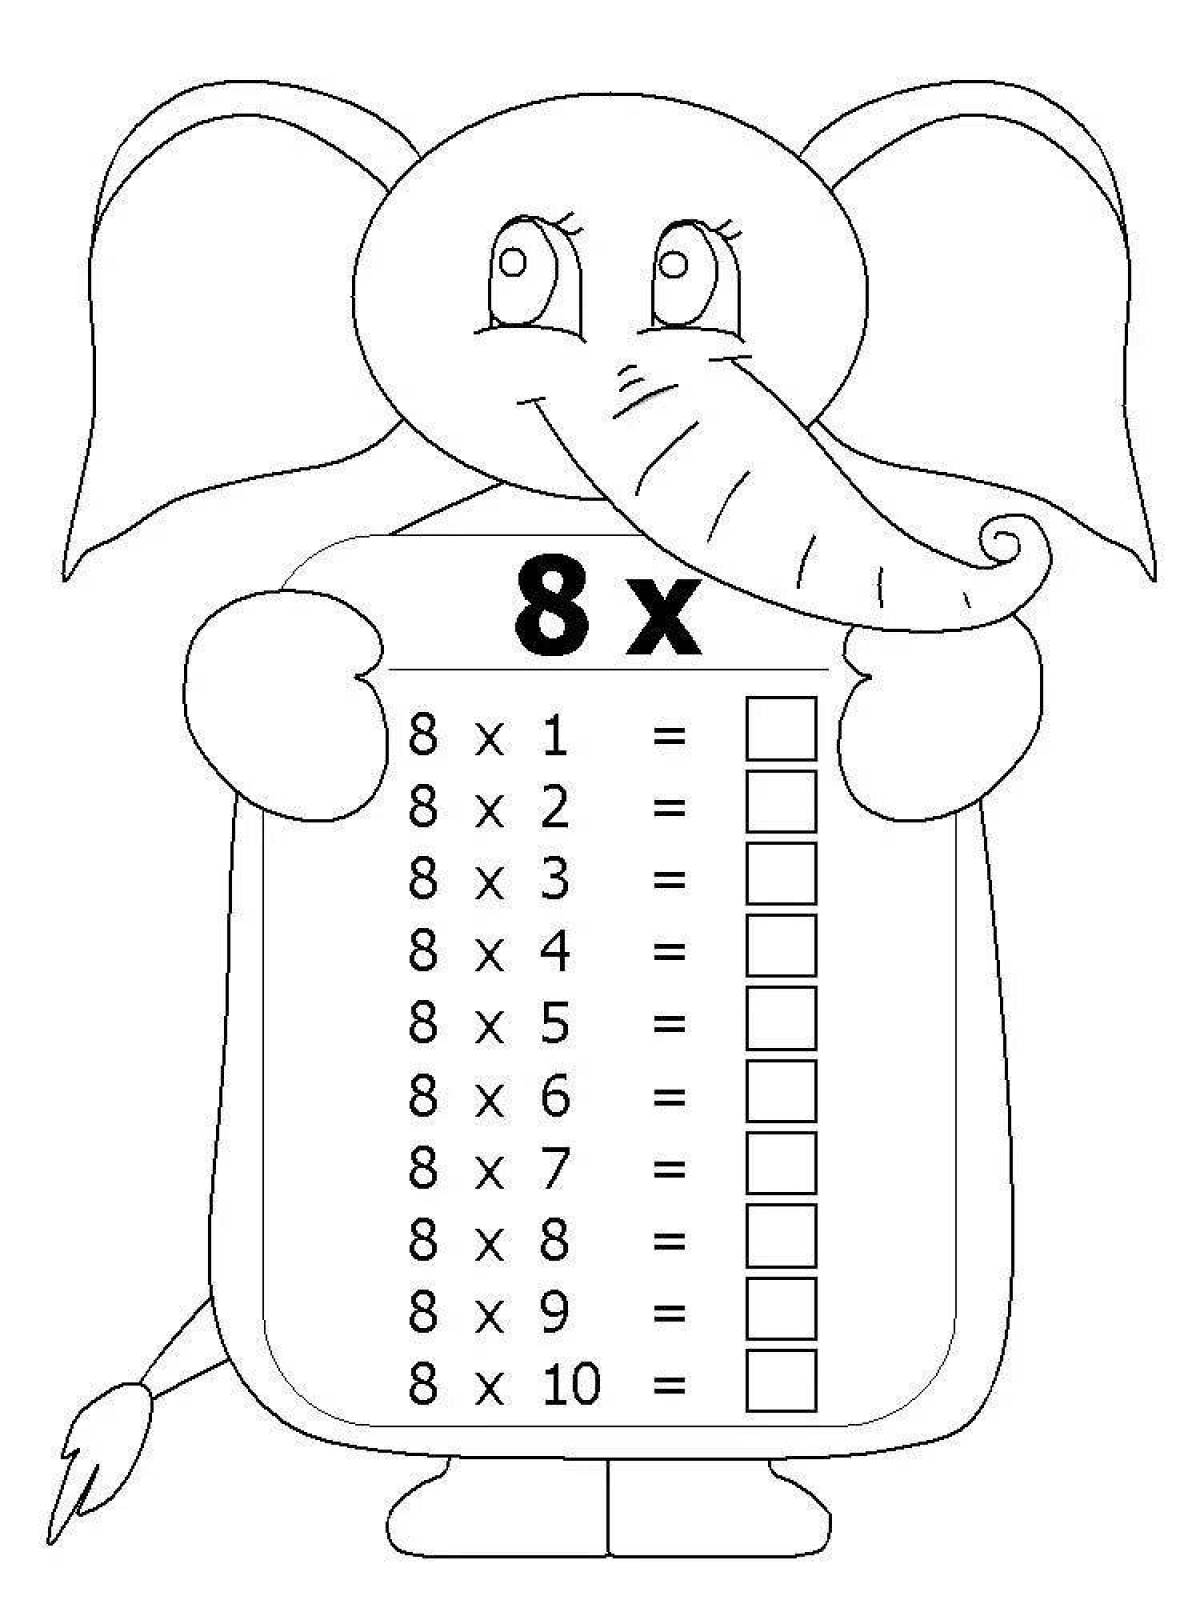 Coloring magic multiplication table 3x